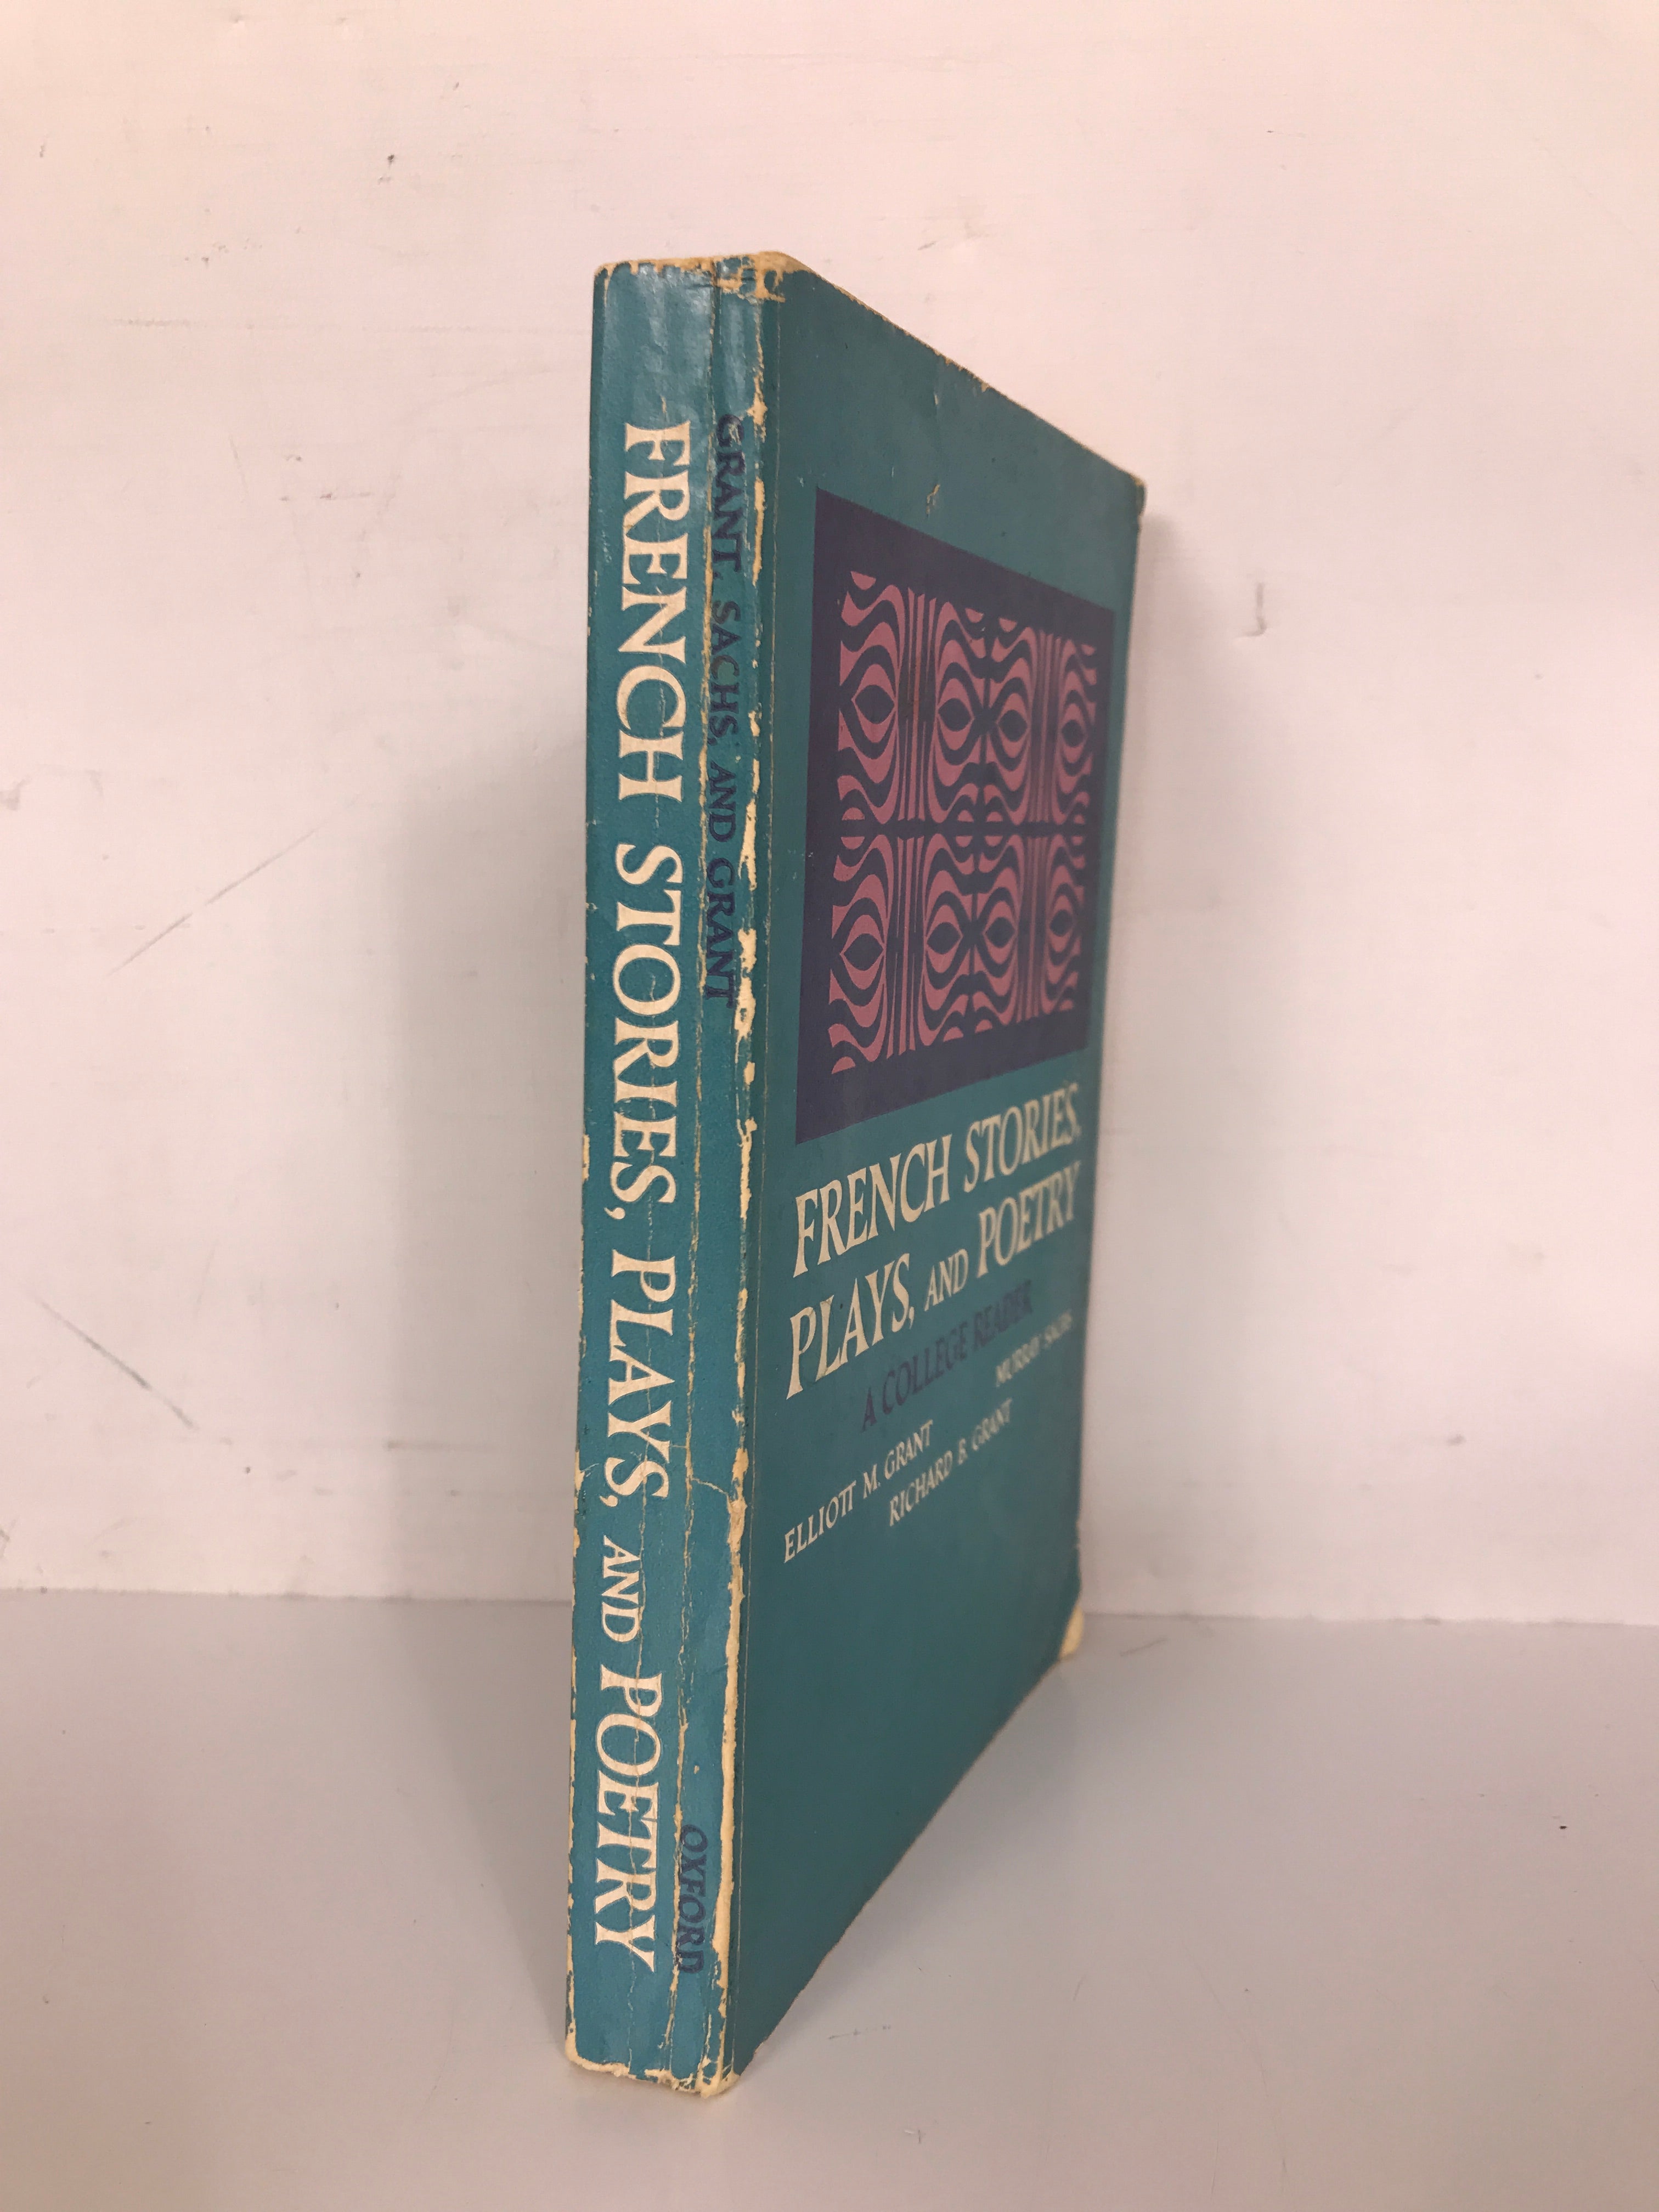 French Stories, Plays, and Poetry by Grant, Sachs, and Grant 1965 SC